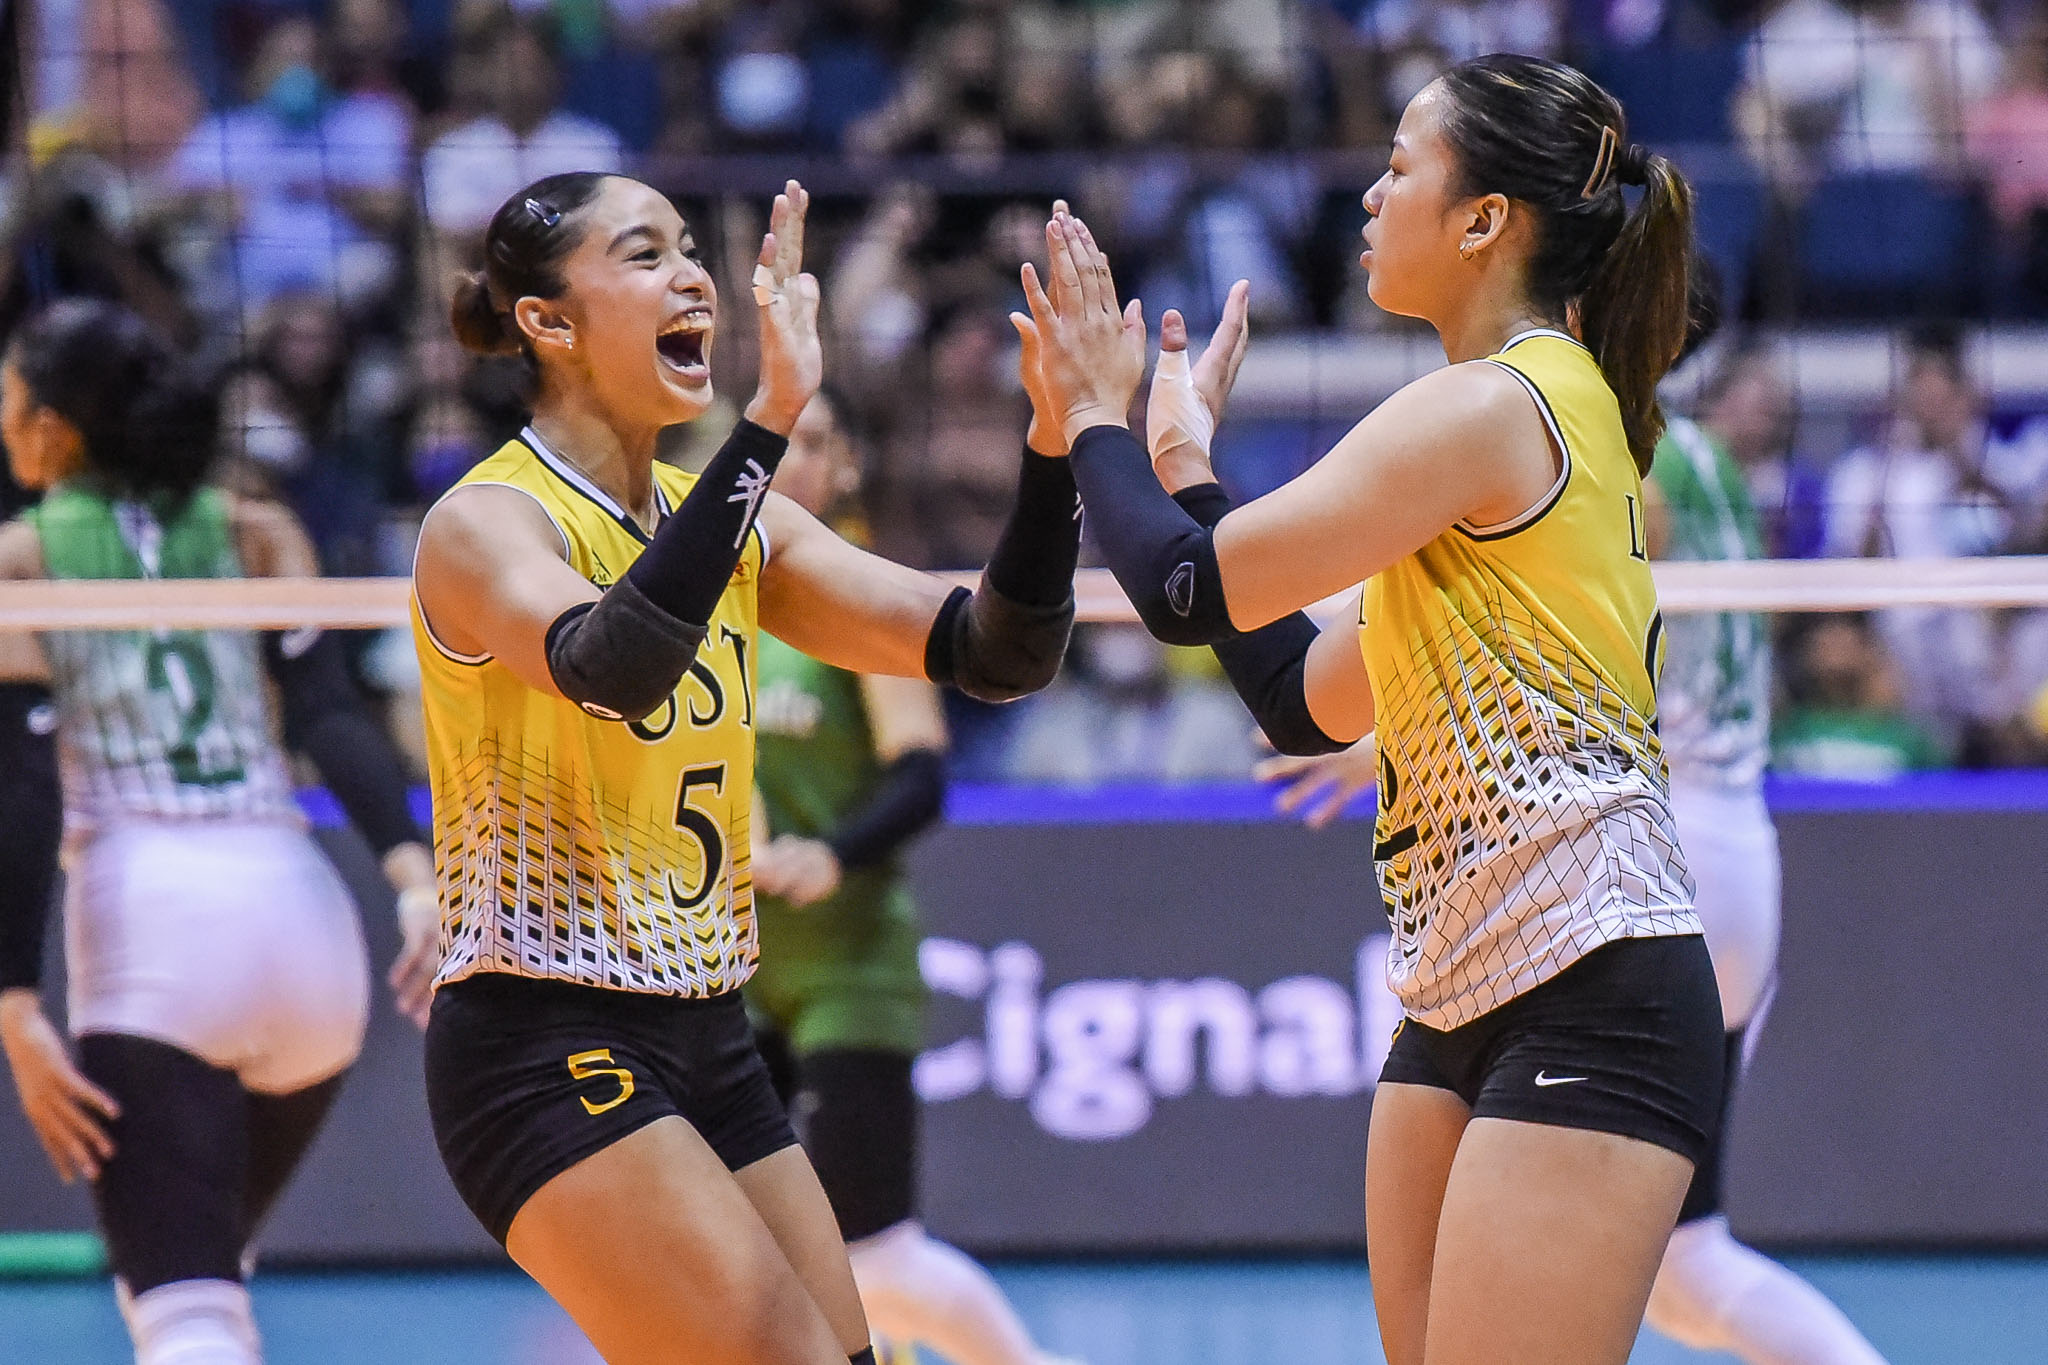 After busy offseason, PVL opens with heightened anticipation Inquirer Sports